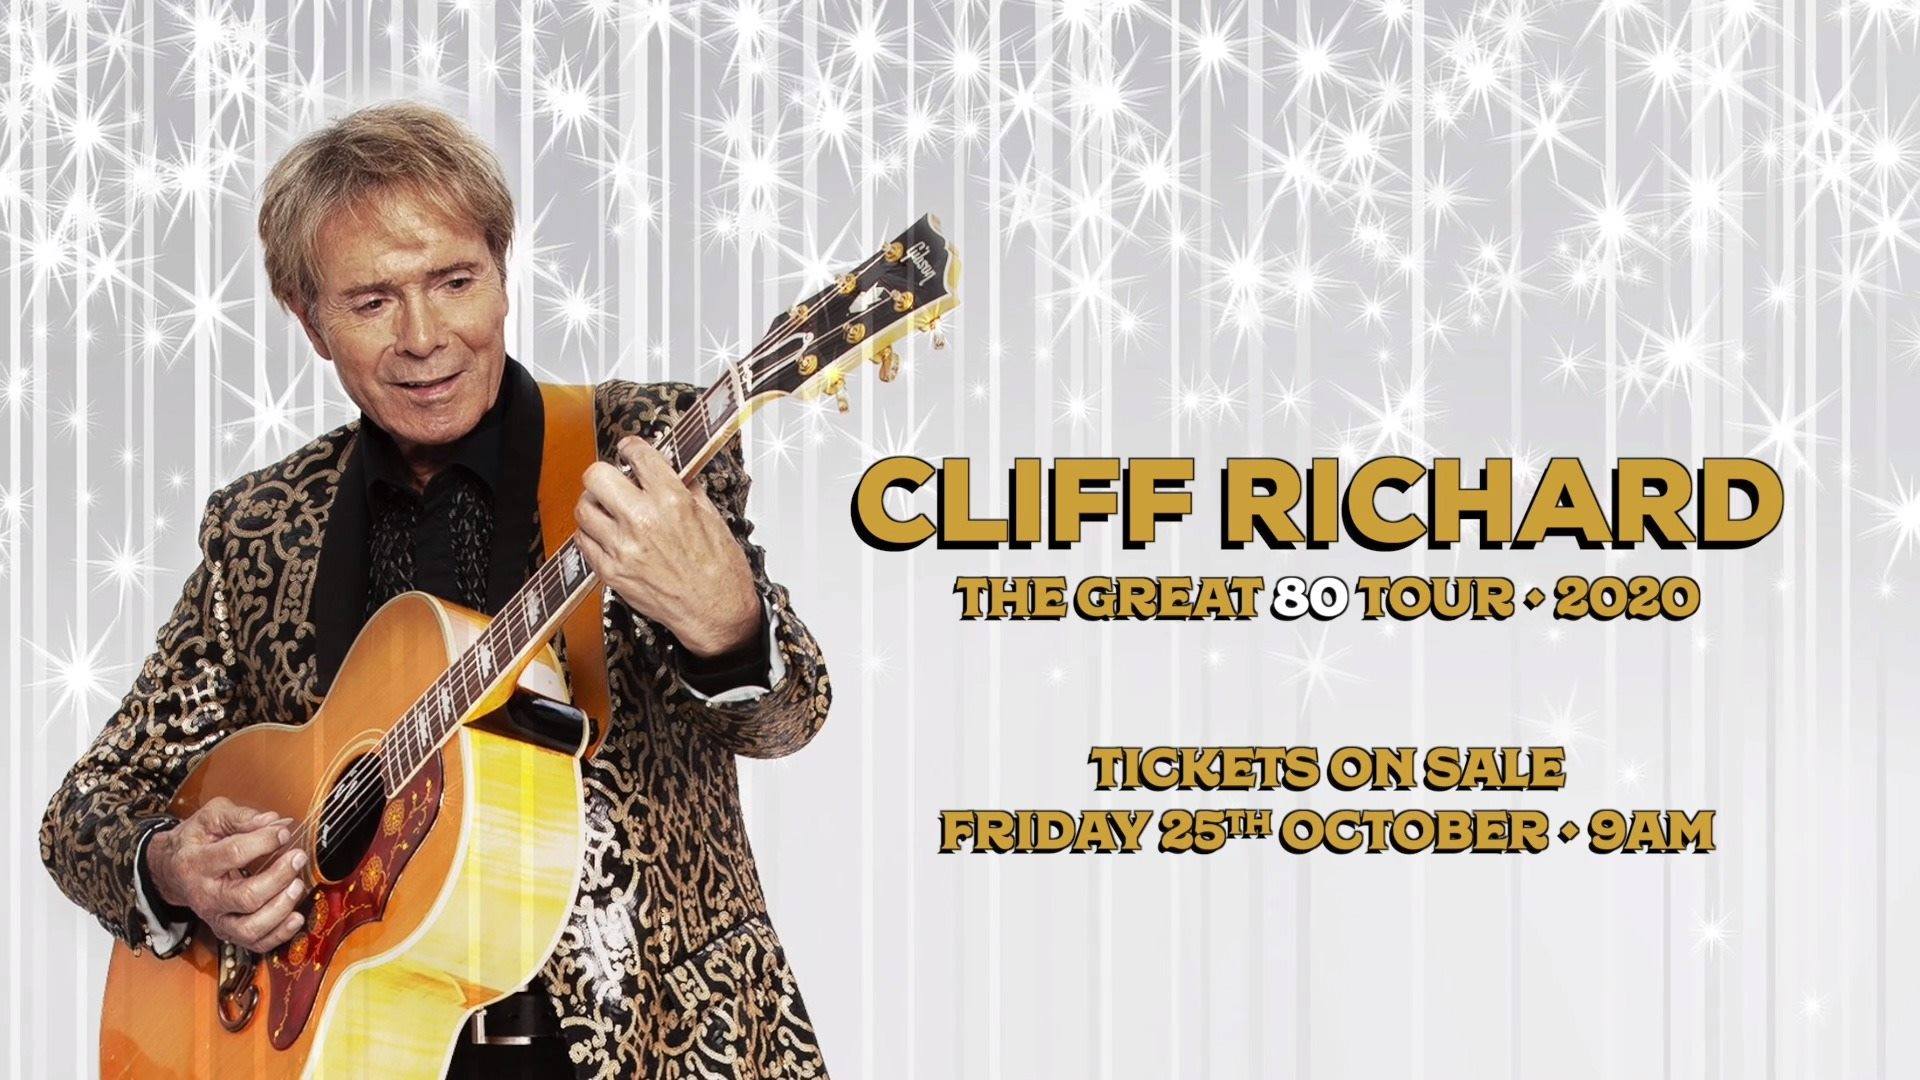 Live Nation UK   Cliff Richard Will Head Out On The Great 80 Tour